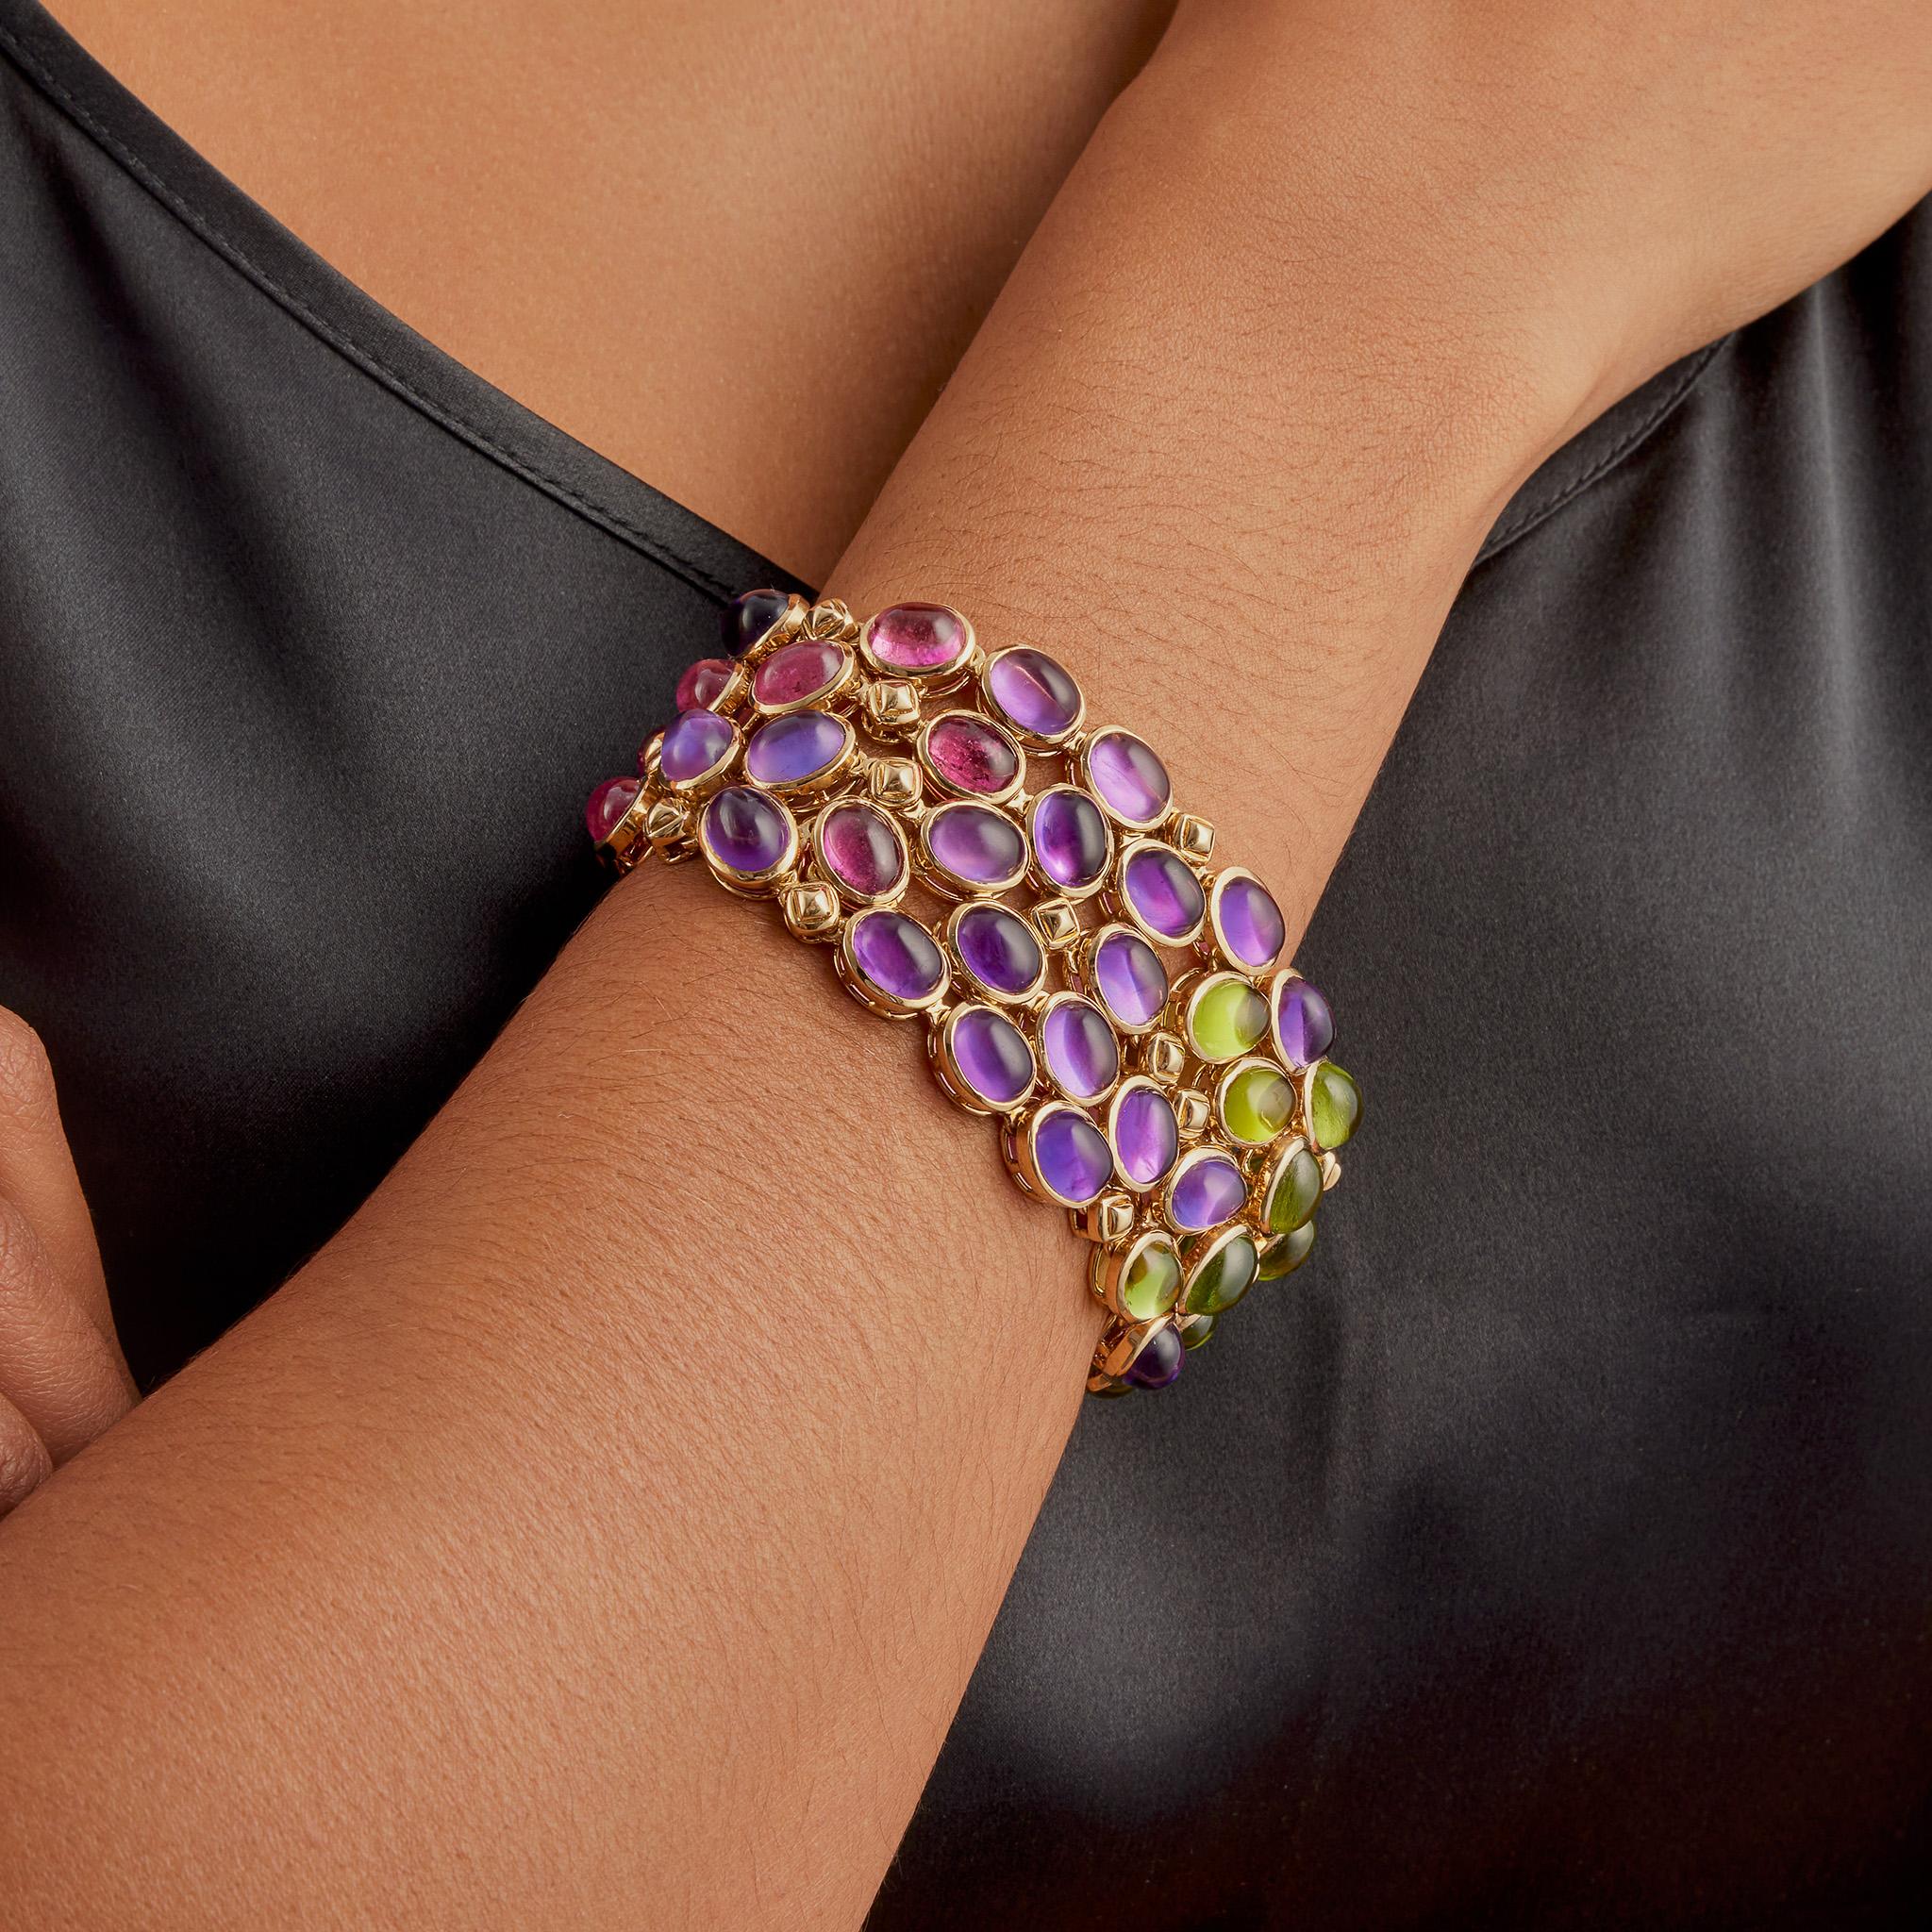 Dating from the 1980s, this strap bracelet by Maison René Boivin is composed of sapphire, pink tourmaline, perdiot,and amethyst, set in 18K gold. The fully flexibly tapering strap is composed of a mesh of oval cabochons subtly graduating in hue from